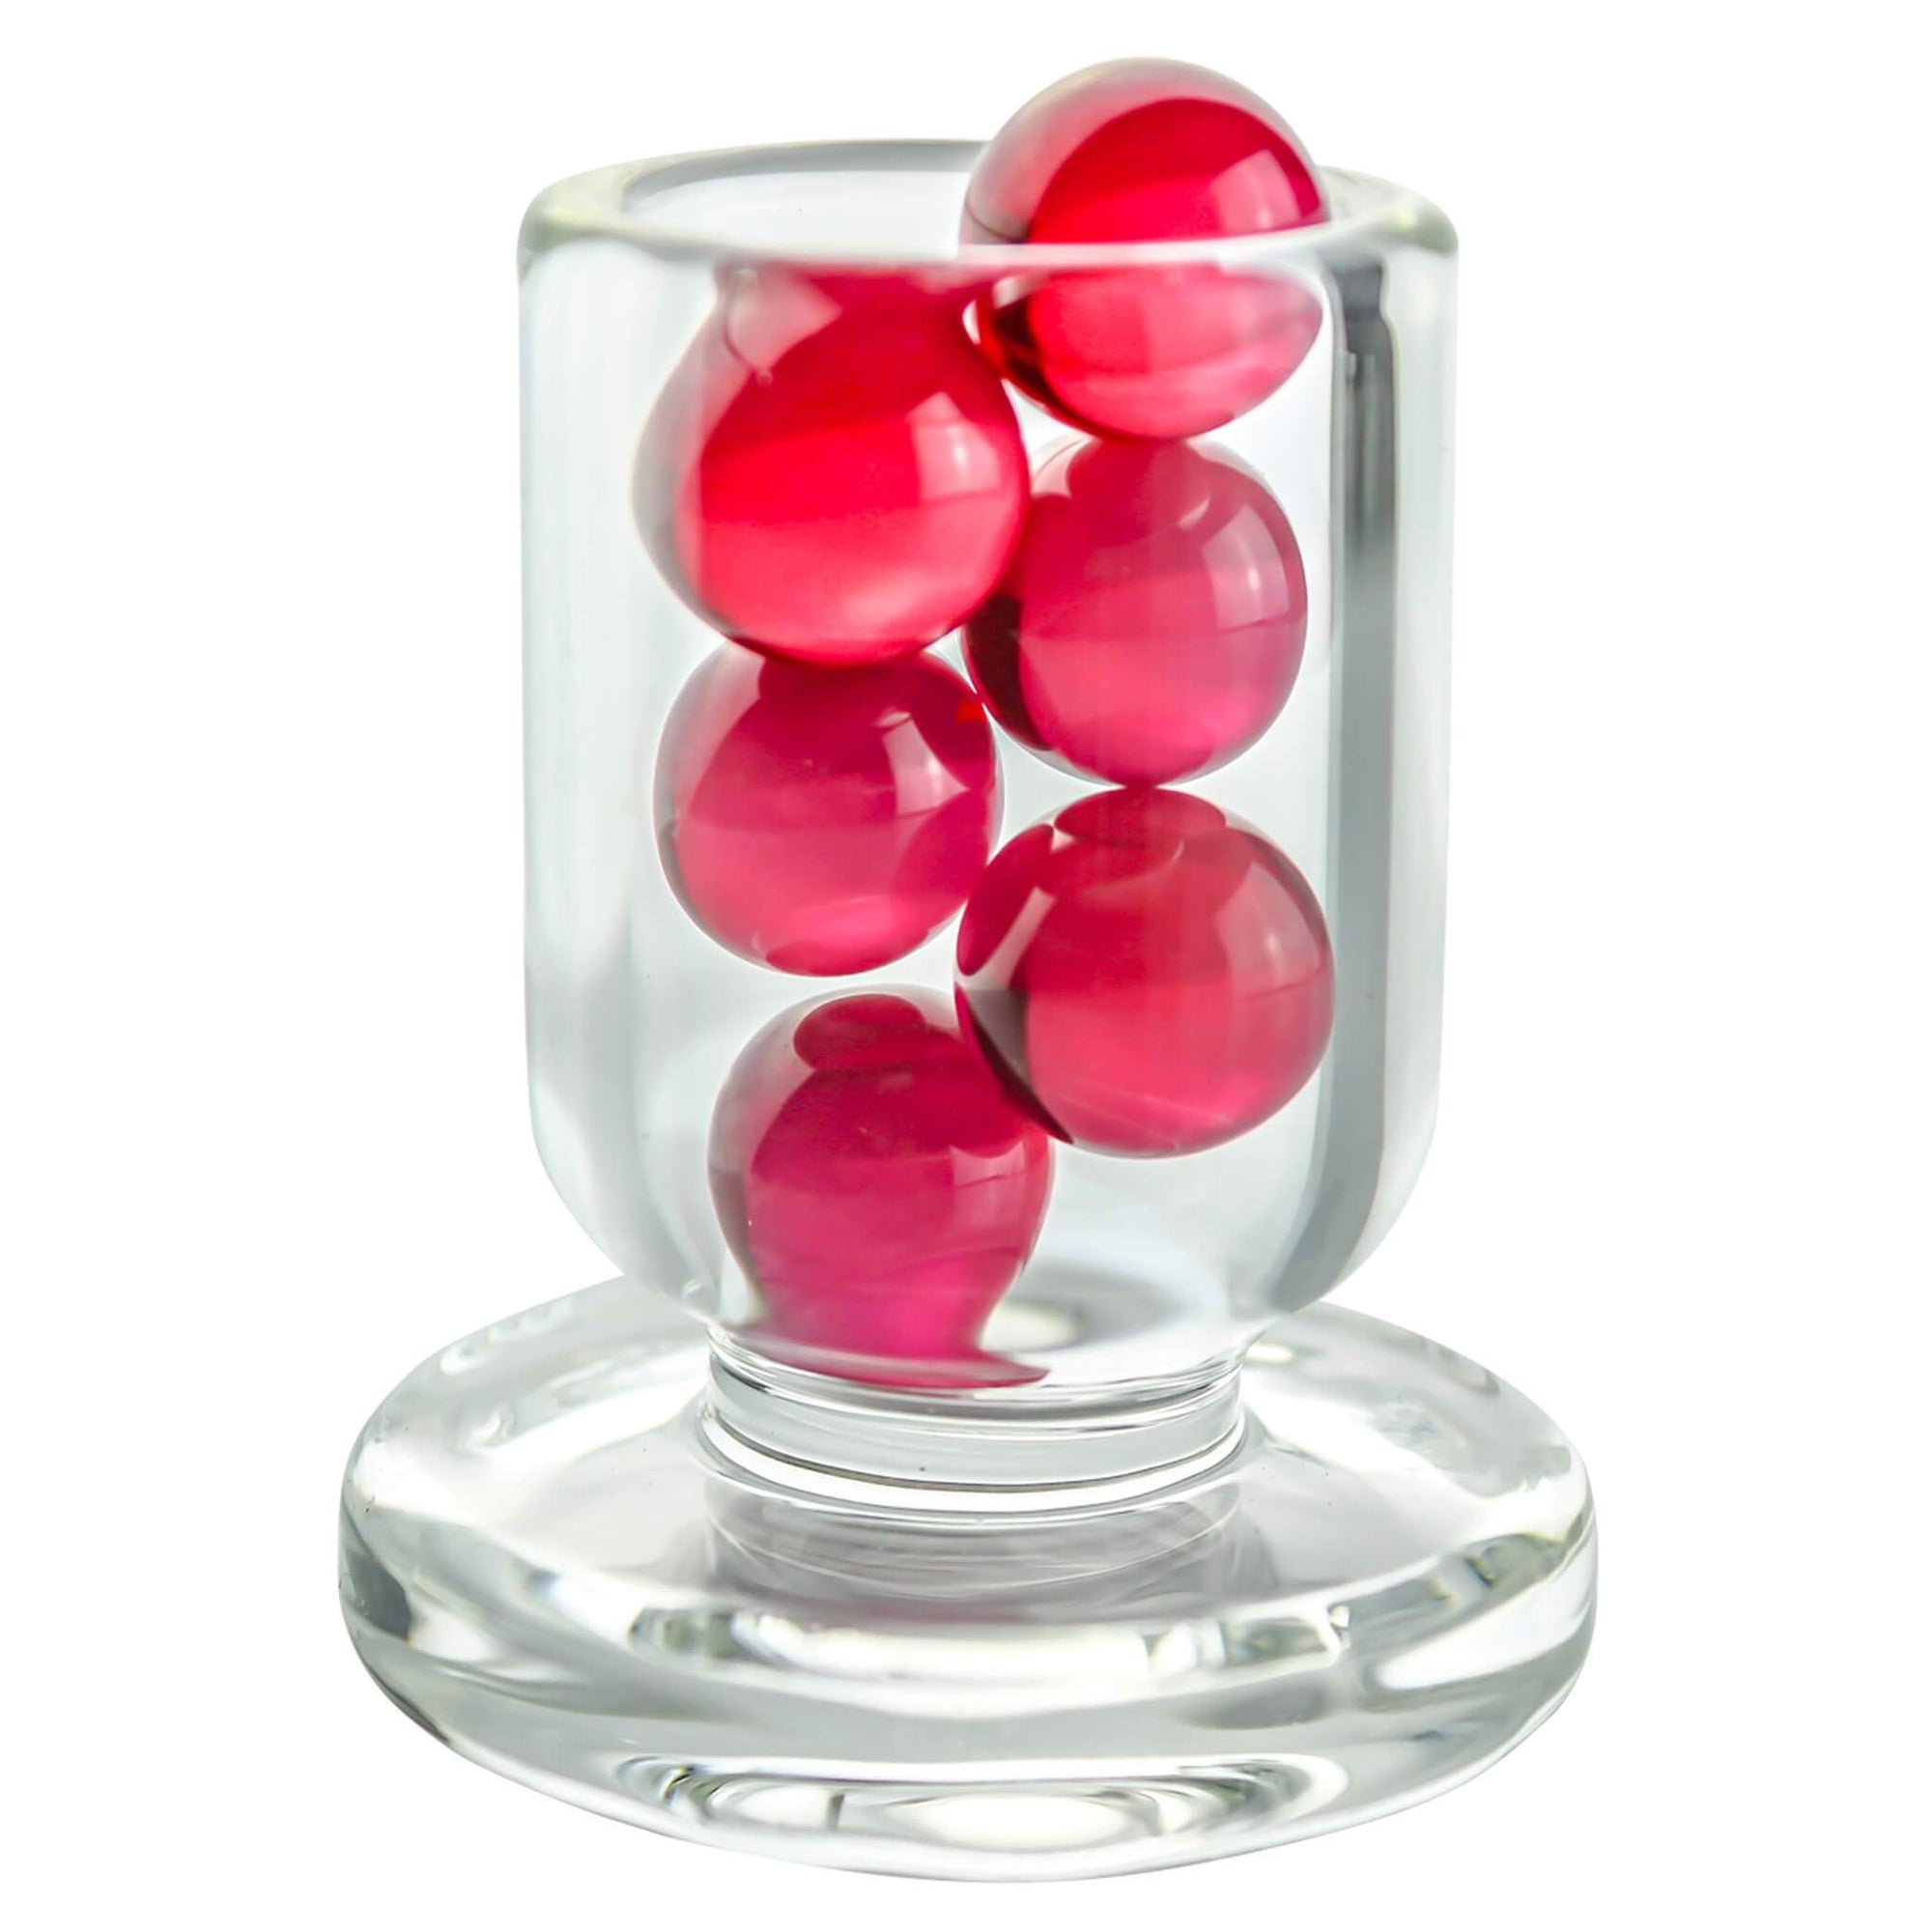 10mm Terp (Dab) Pearls-Ruby | In Cup | Dabbing Warehouse